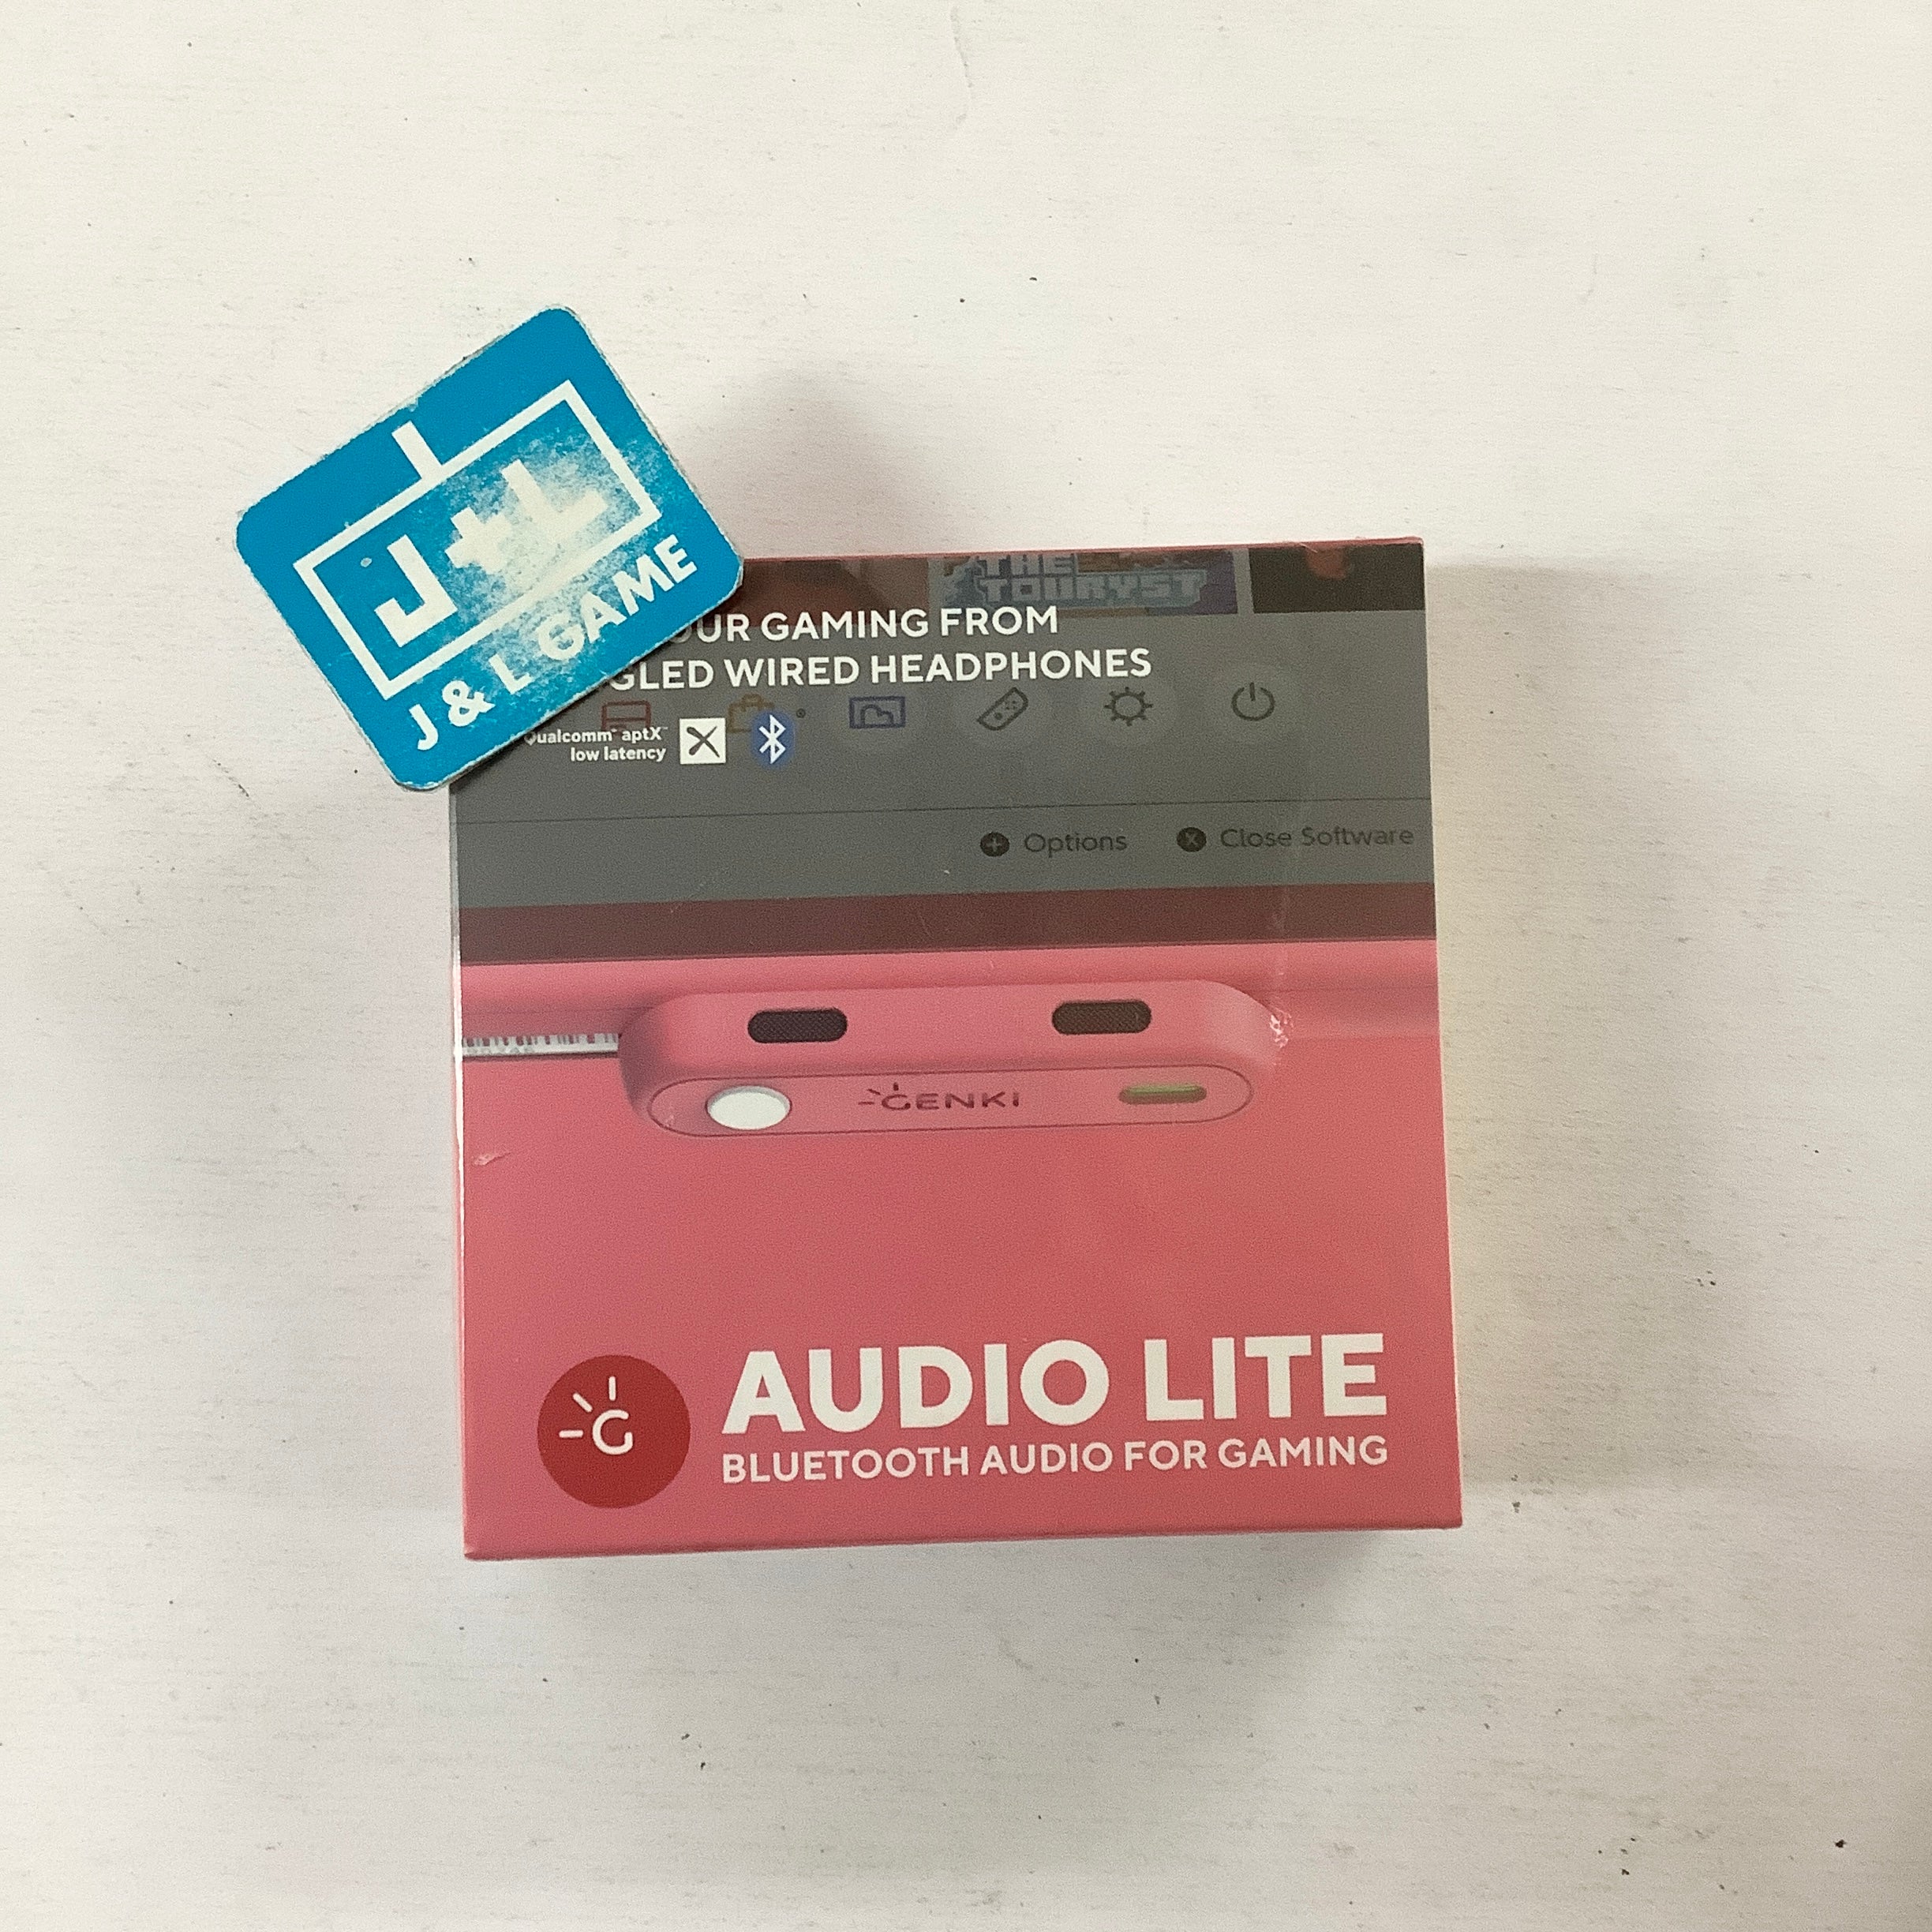 GENKI Audio Lite Bluetooth 5.0 Adapter (Coral) - (NSW) Nintendo Switch Accessories Human Things   